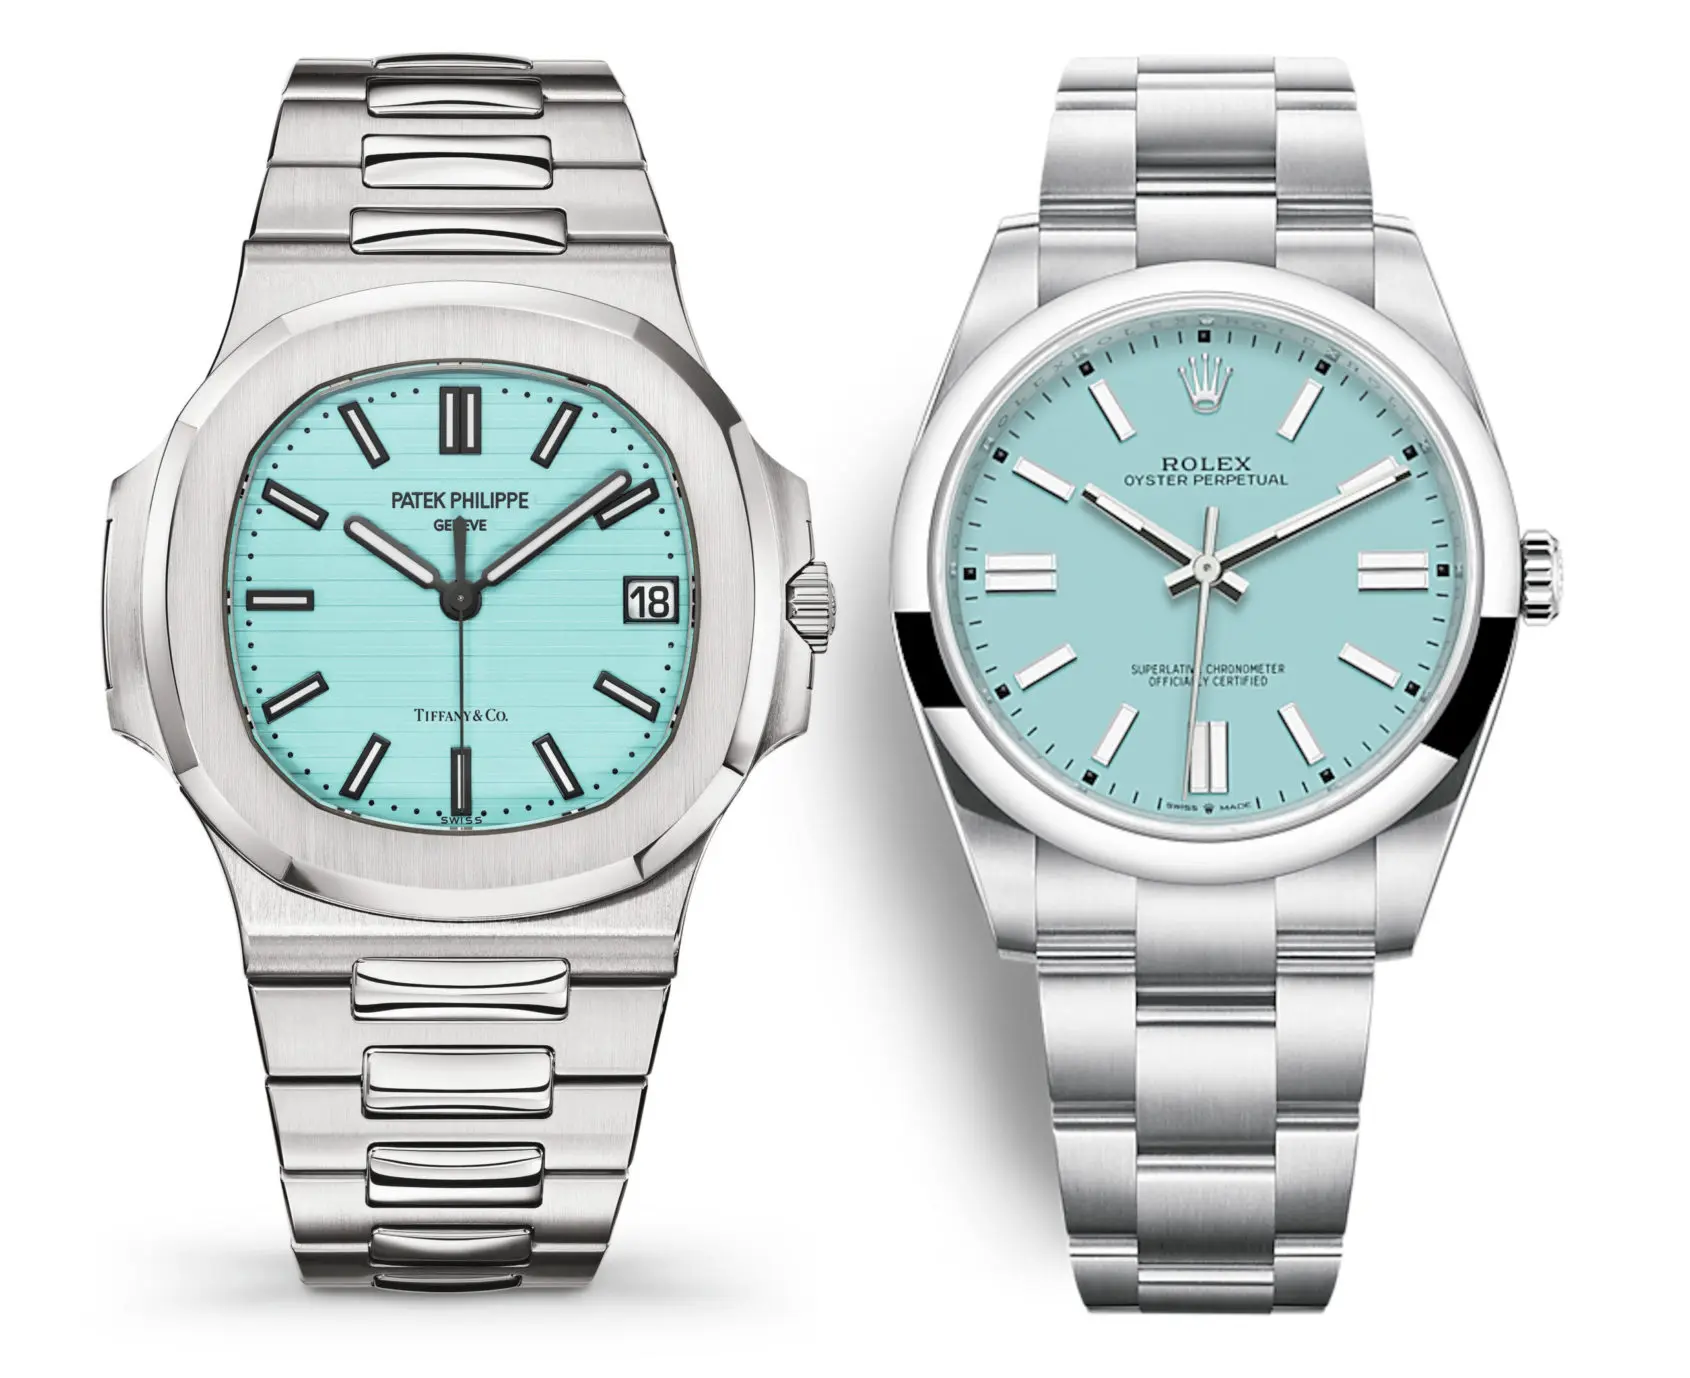 Patek Philippe Celebrate 170 Years of Tiffany & Co. With the